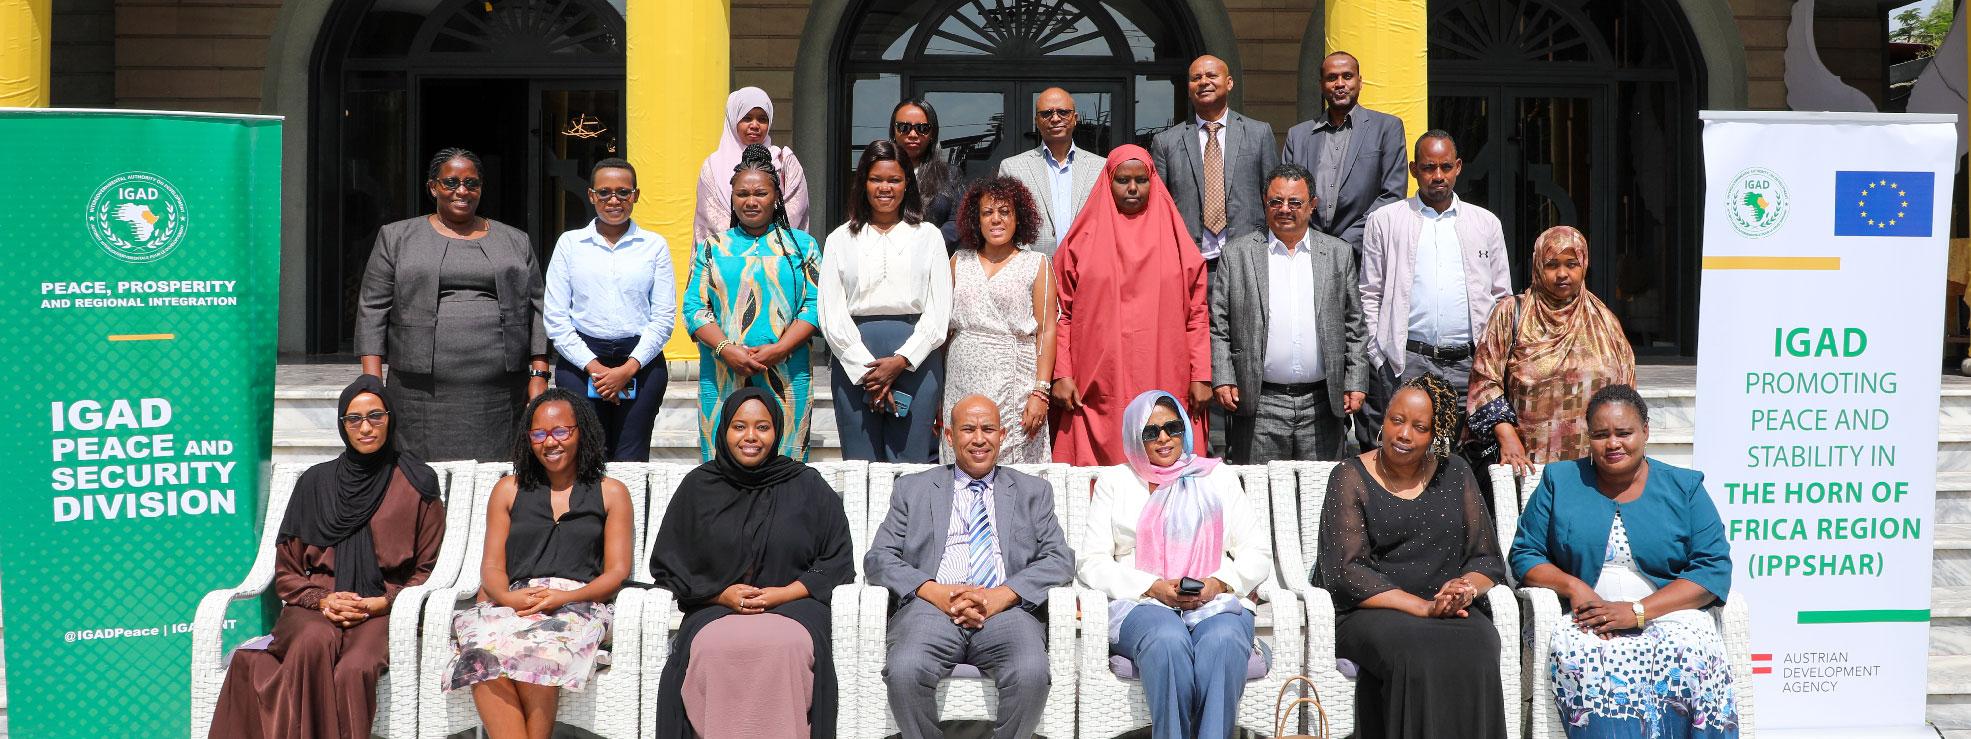 IGAD conducts a Workshop on Women Peace and Security (WPS) Trends in the Region